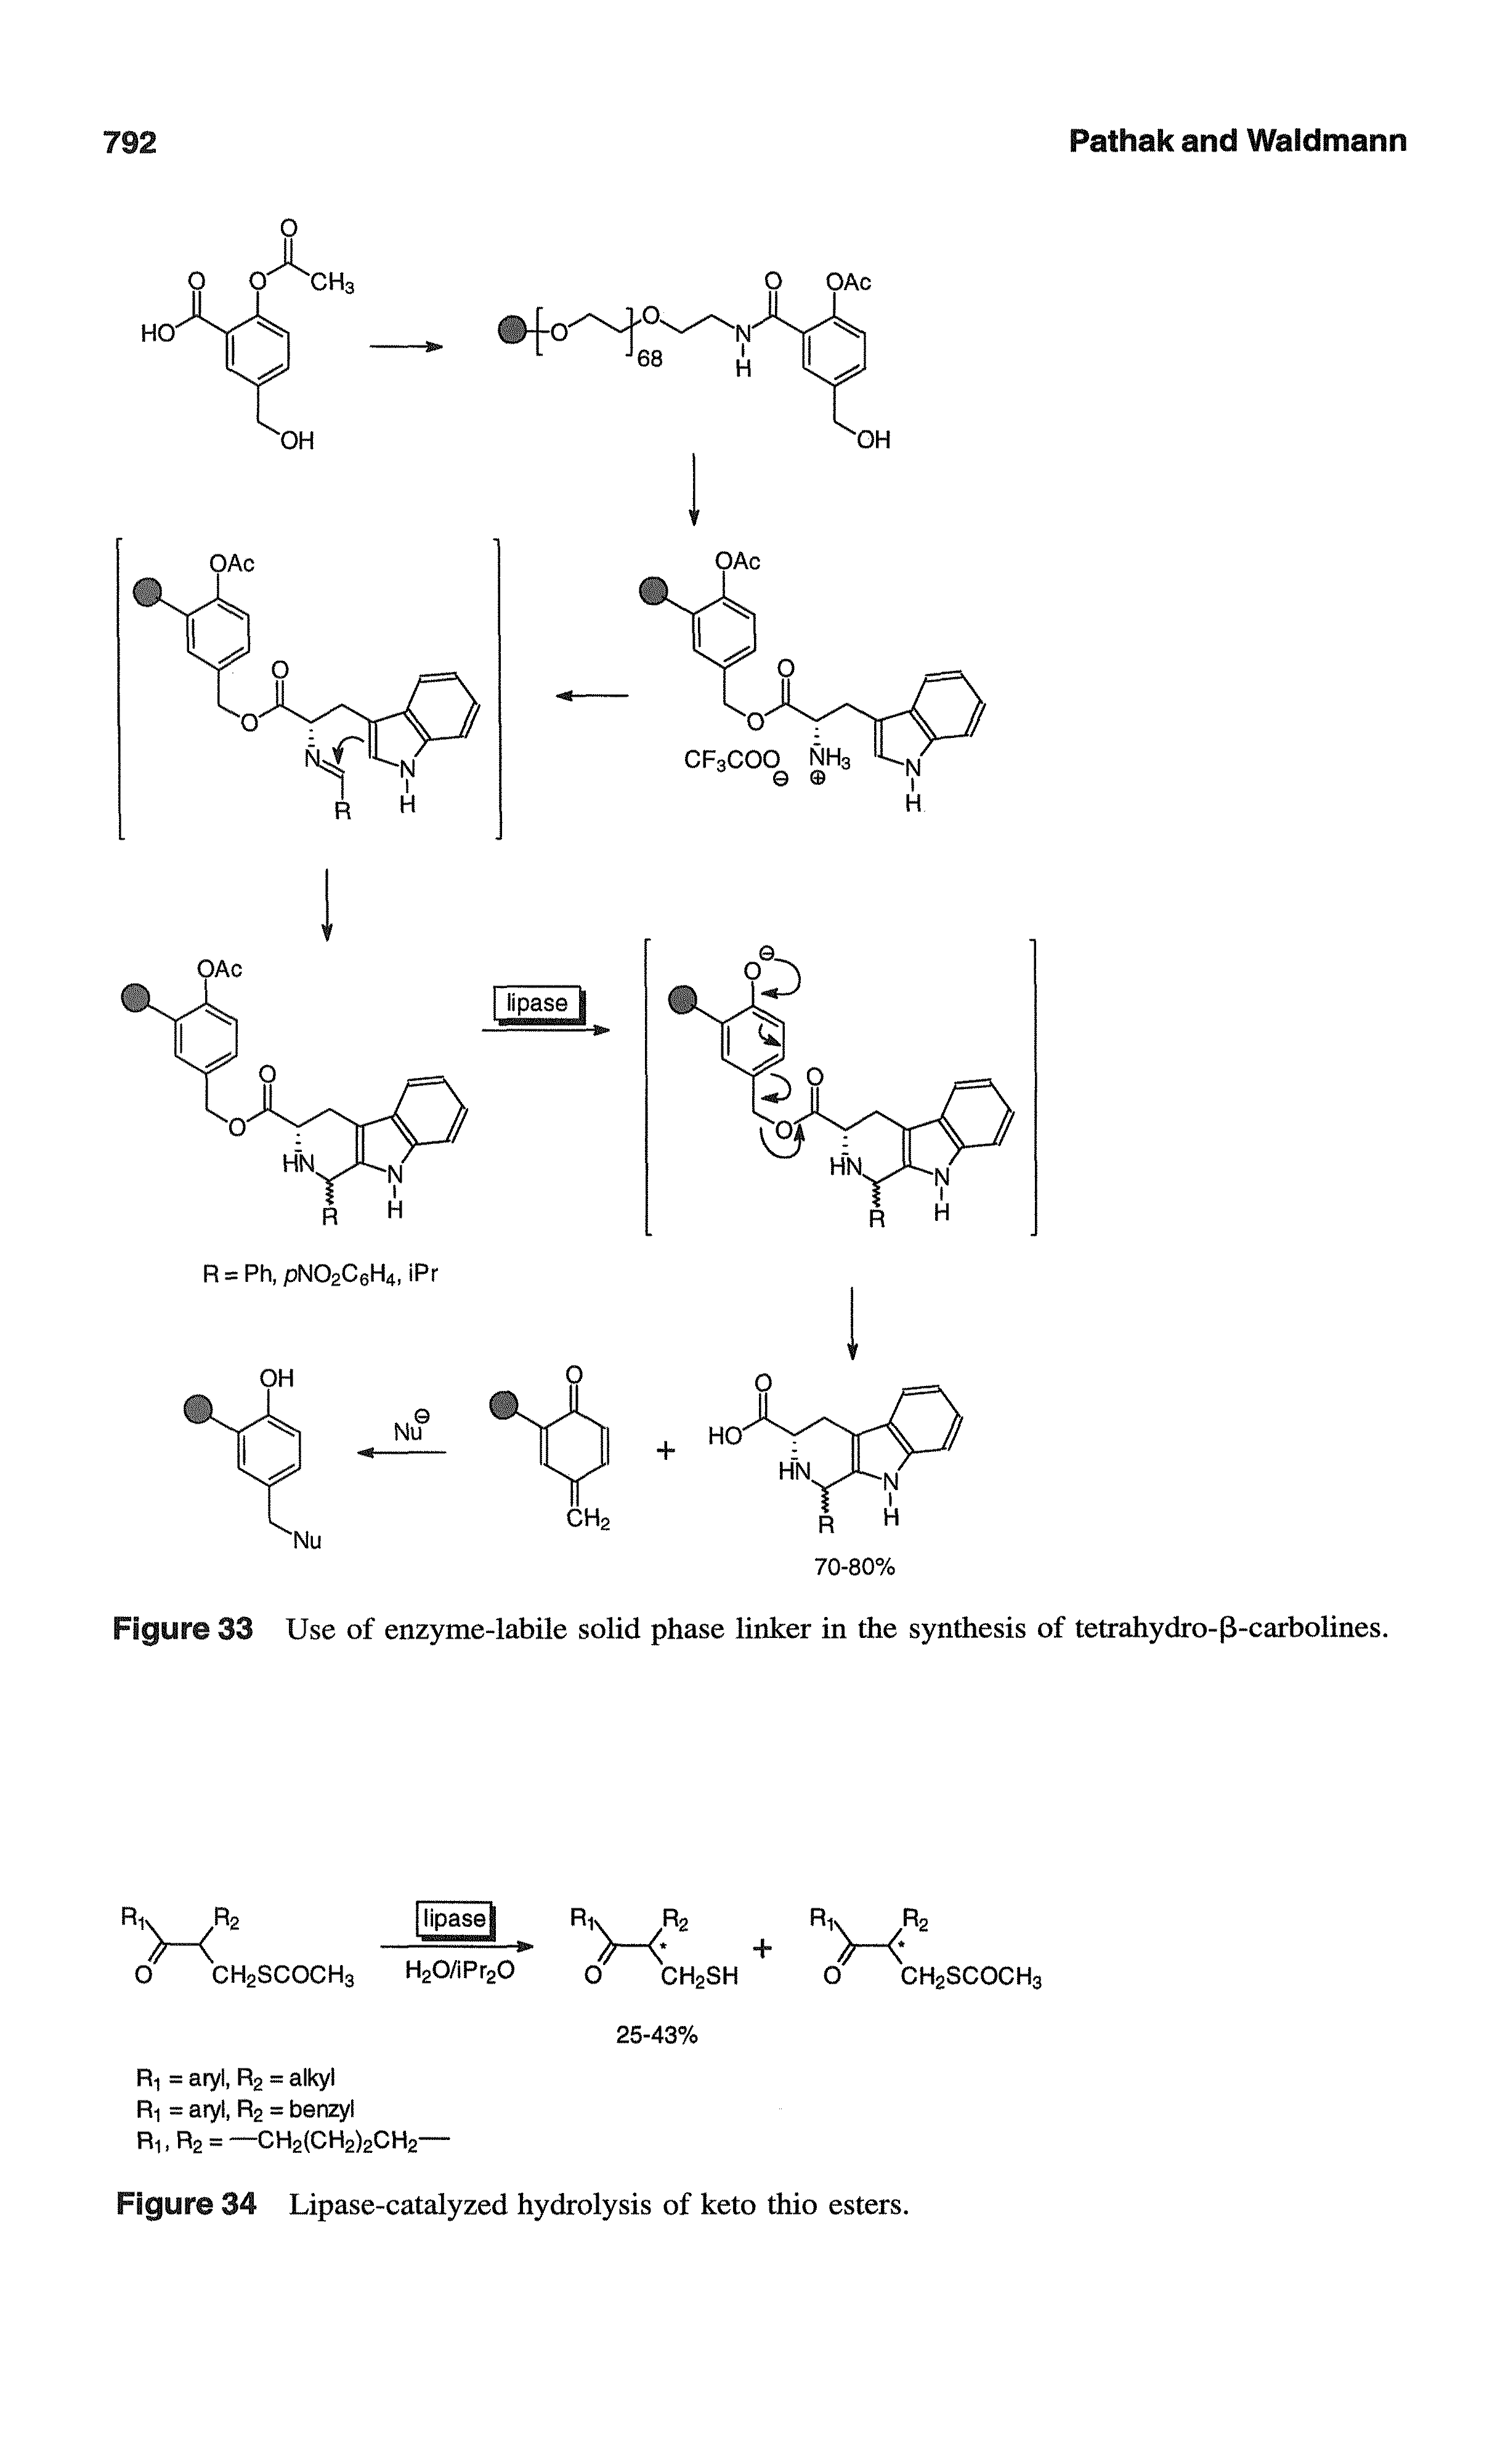 Figure 33 Use of enzyme-labile solid phase linker in the synthesis of tetrahydro-P-carbolines.